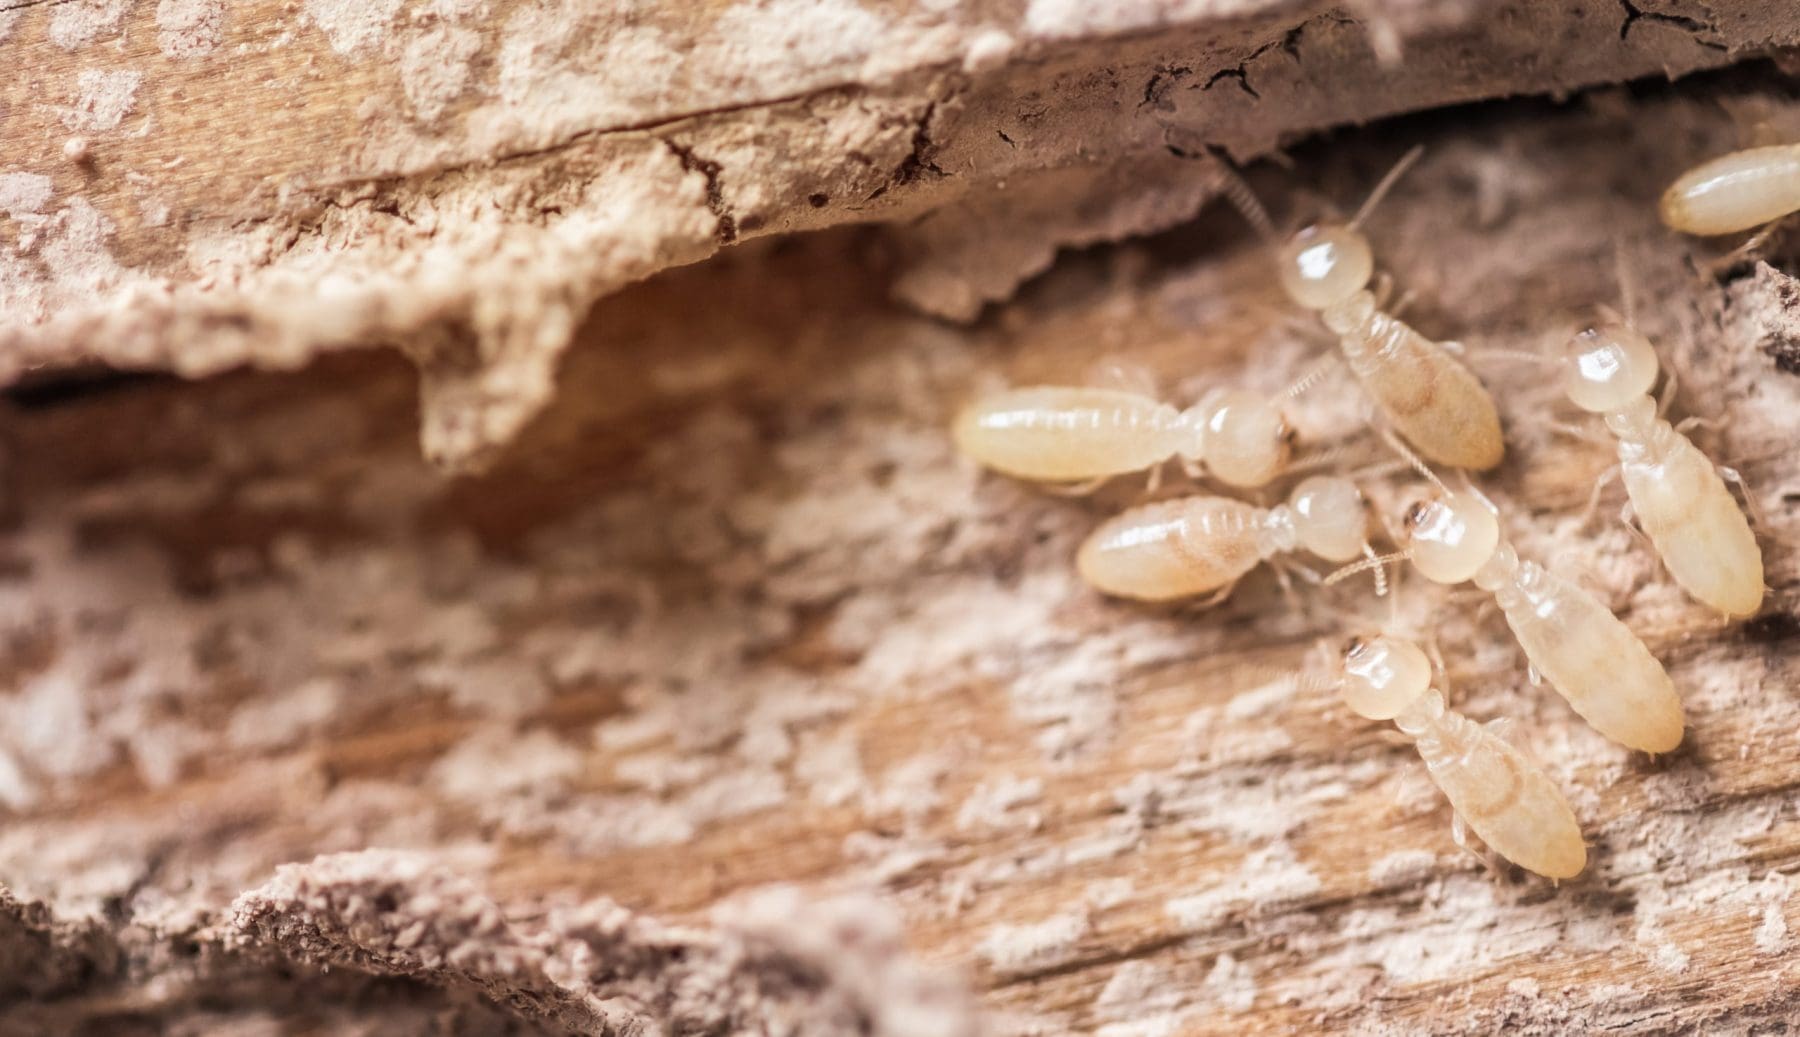 Where Do Termites Come From?